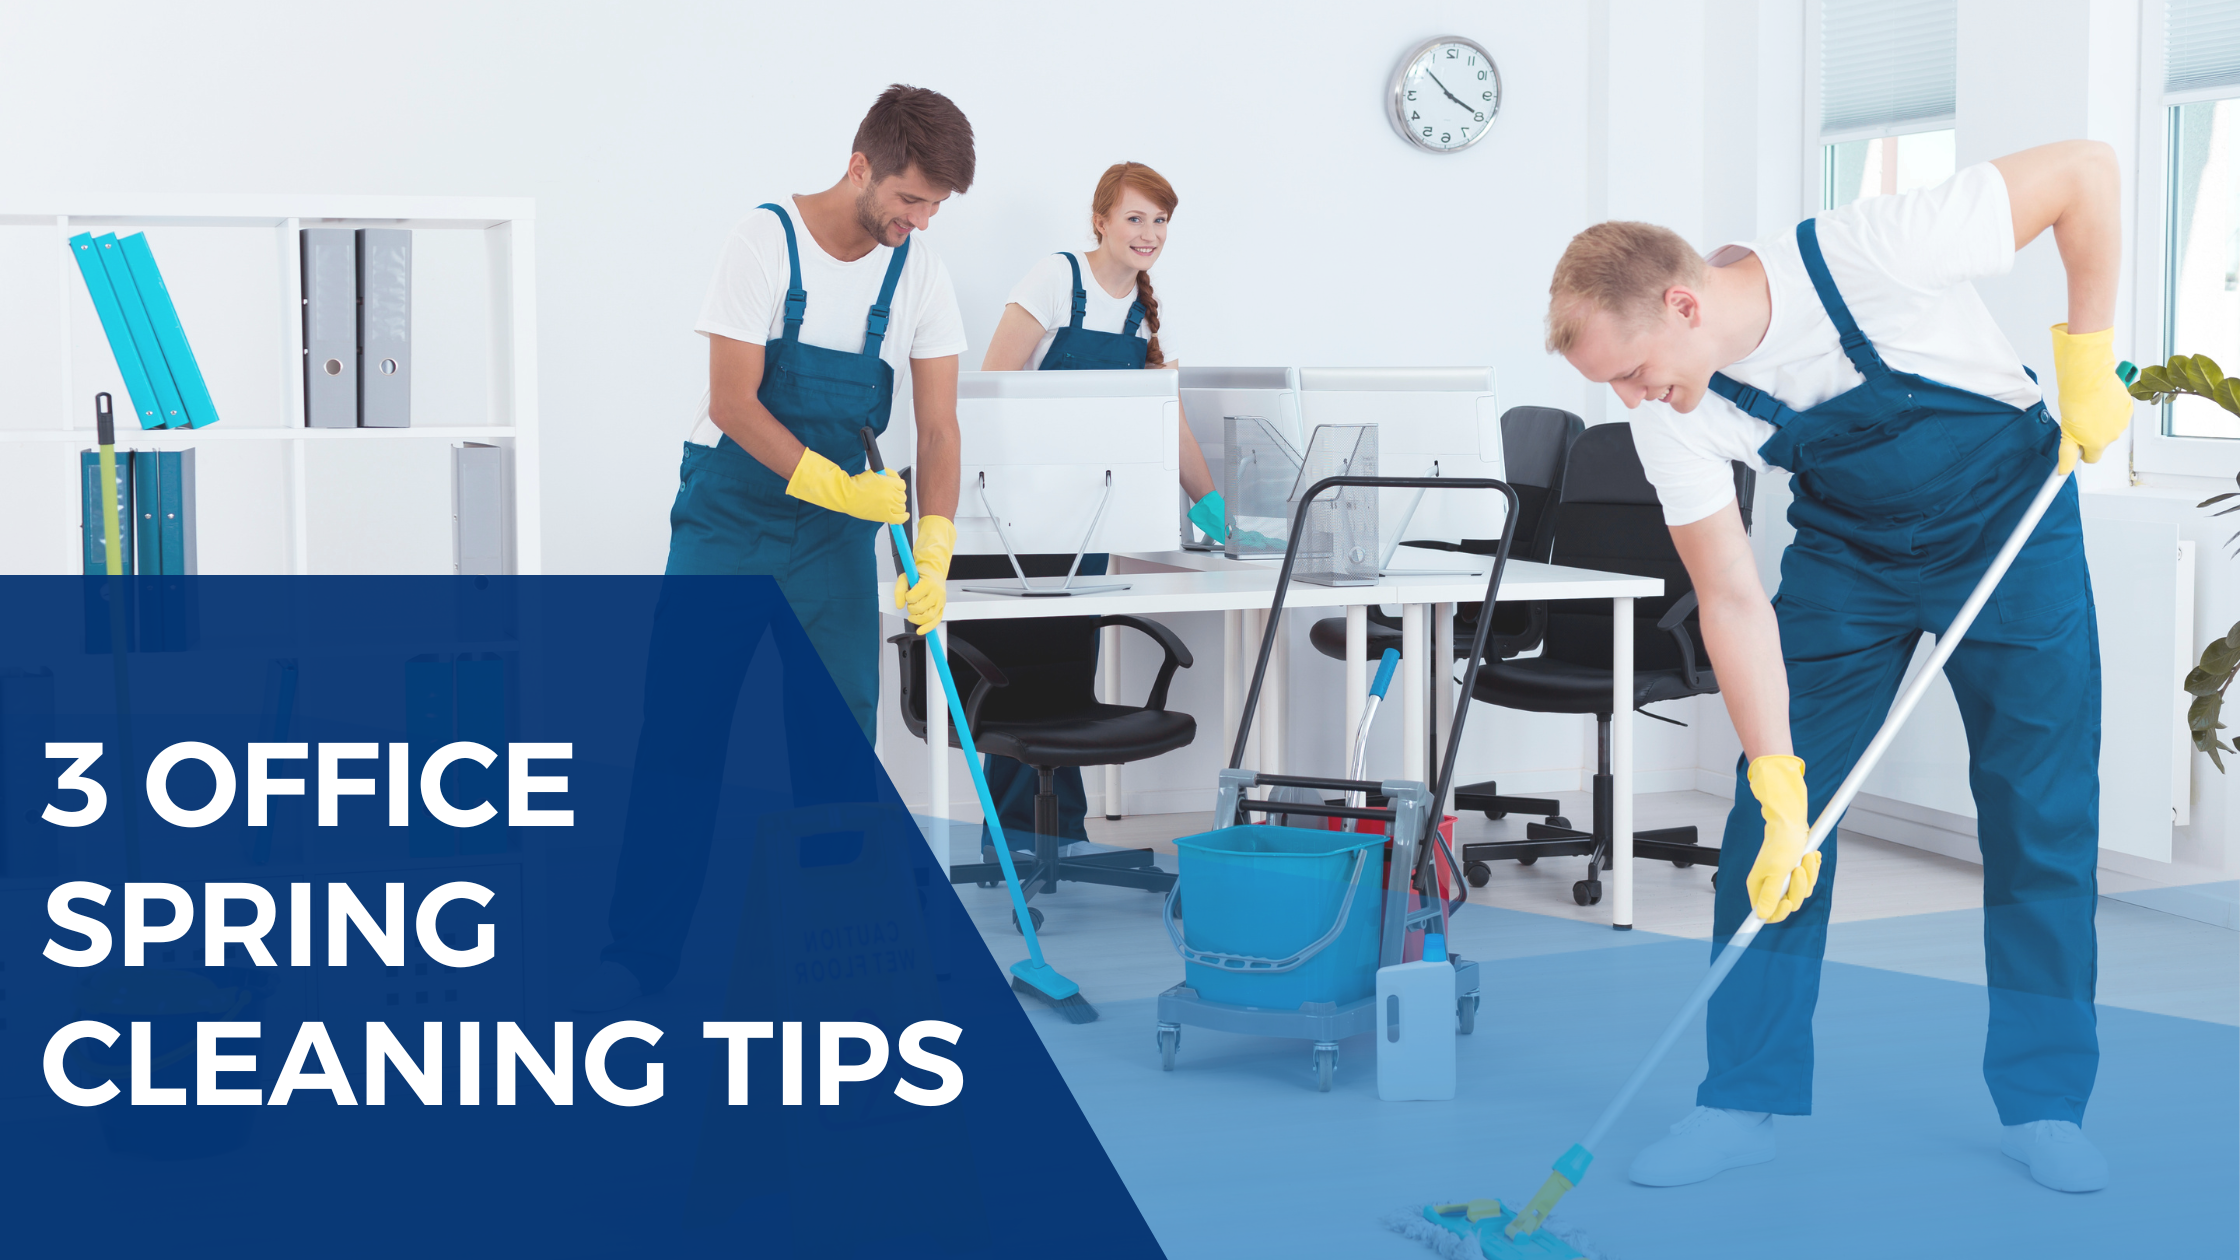 3 commercial office cleaning tips for Spring